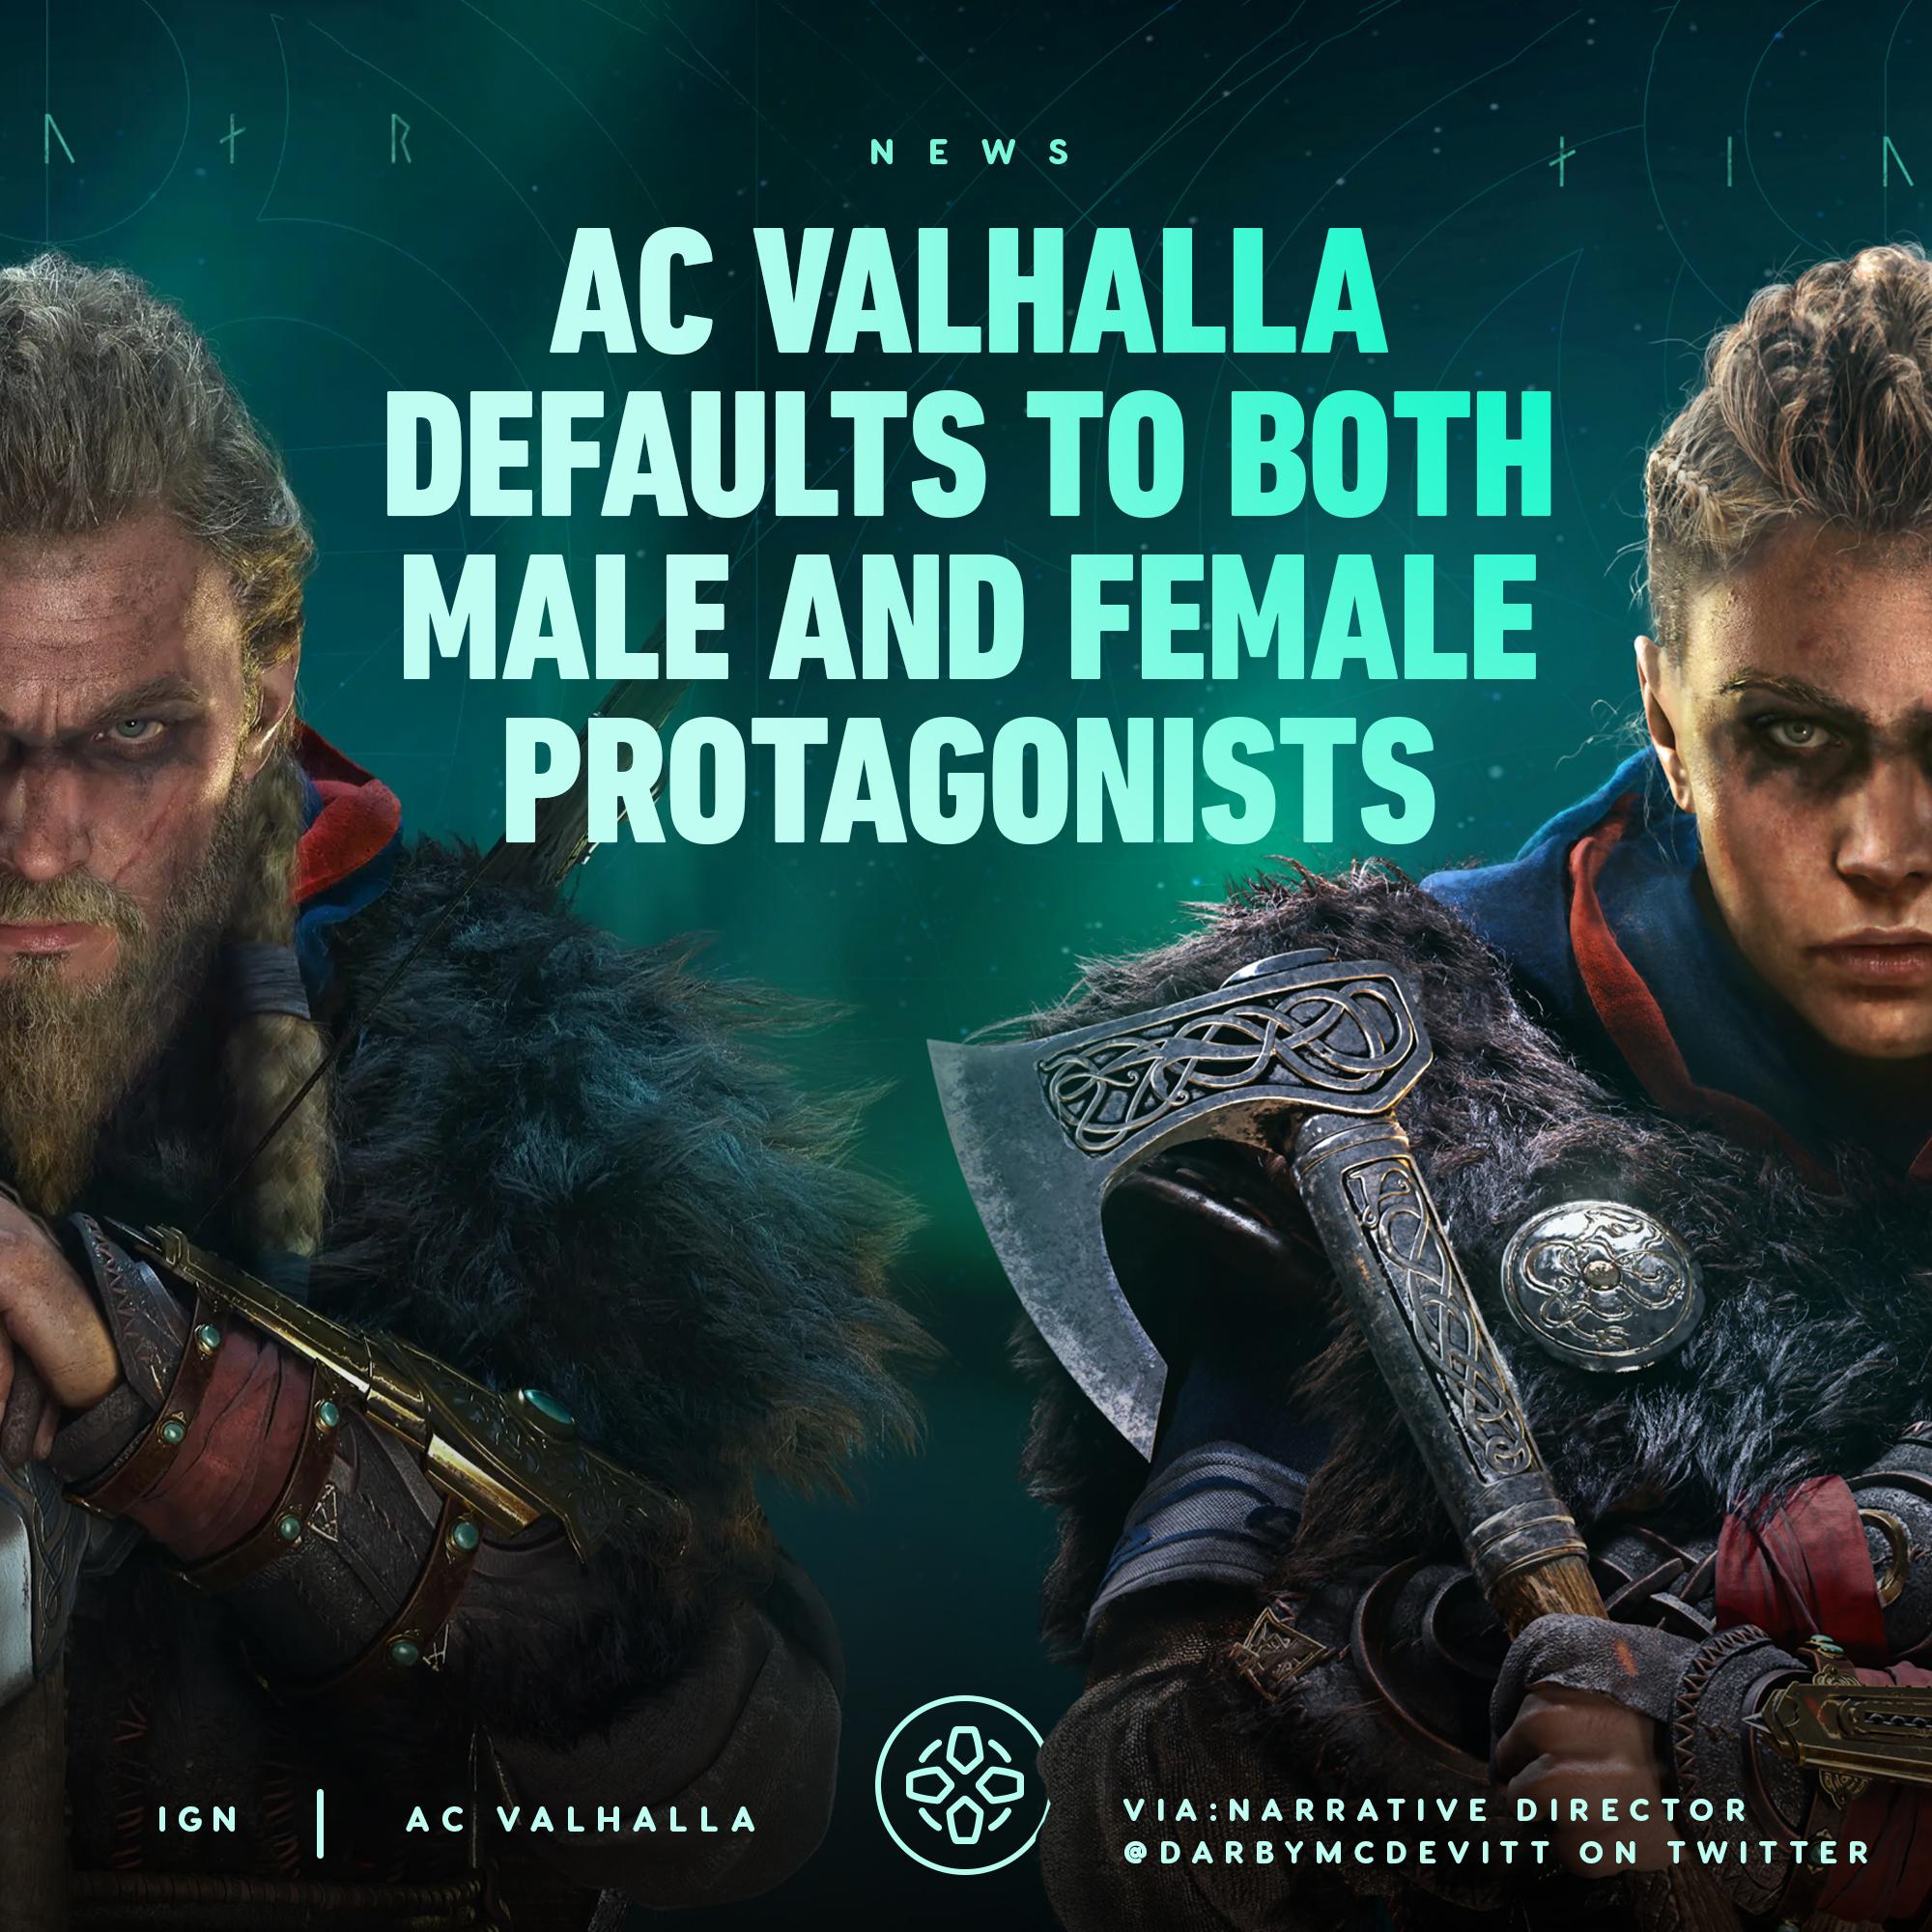 Ign On Twitter Assassin S Creed Valhalla Defaults To A Let The Animus Decide Option Where Both The Male And Female Versions Of Eivor Are Playable At Various Points Both Are Considered